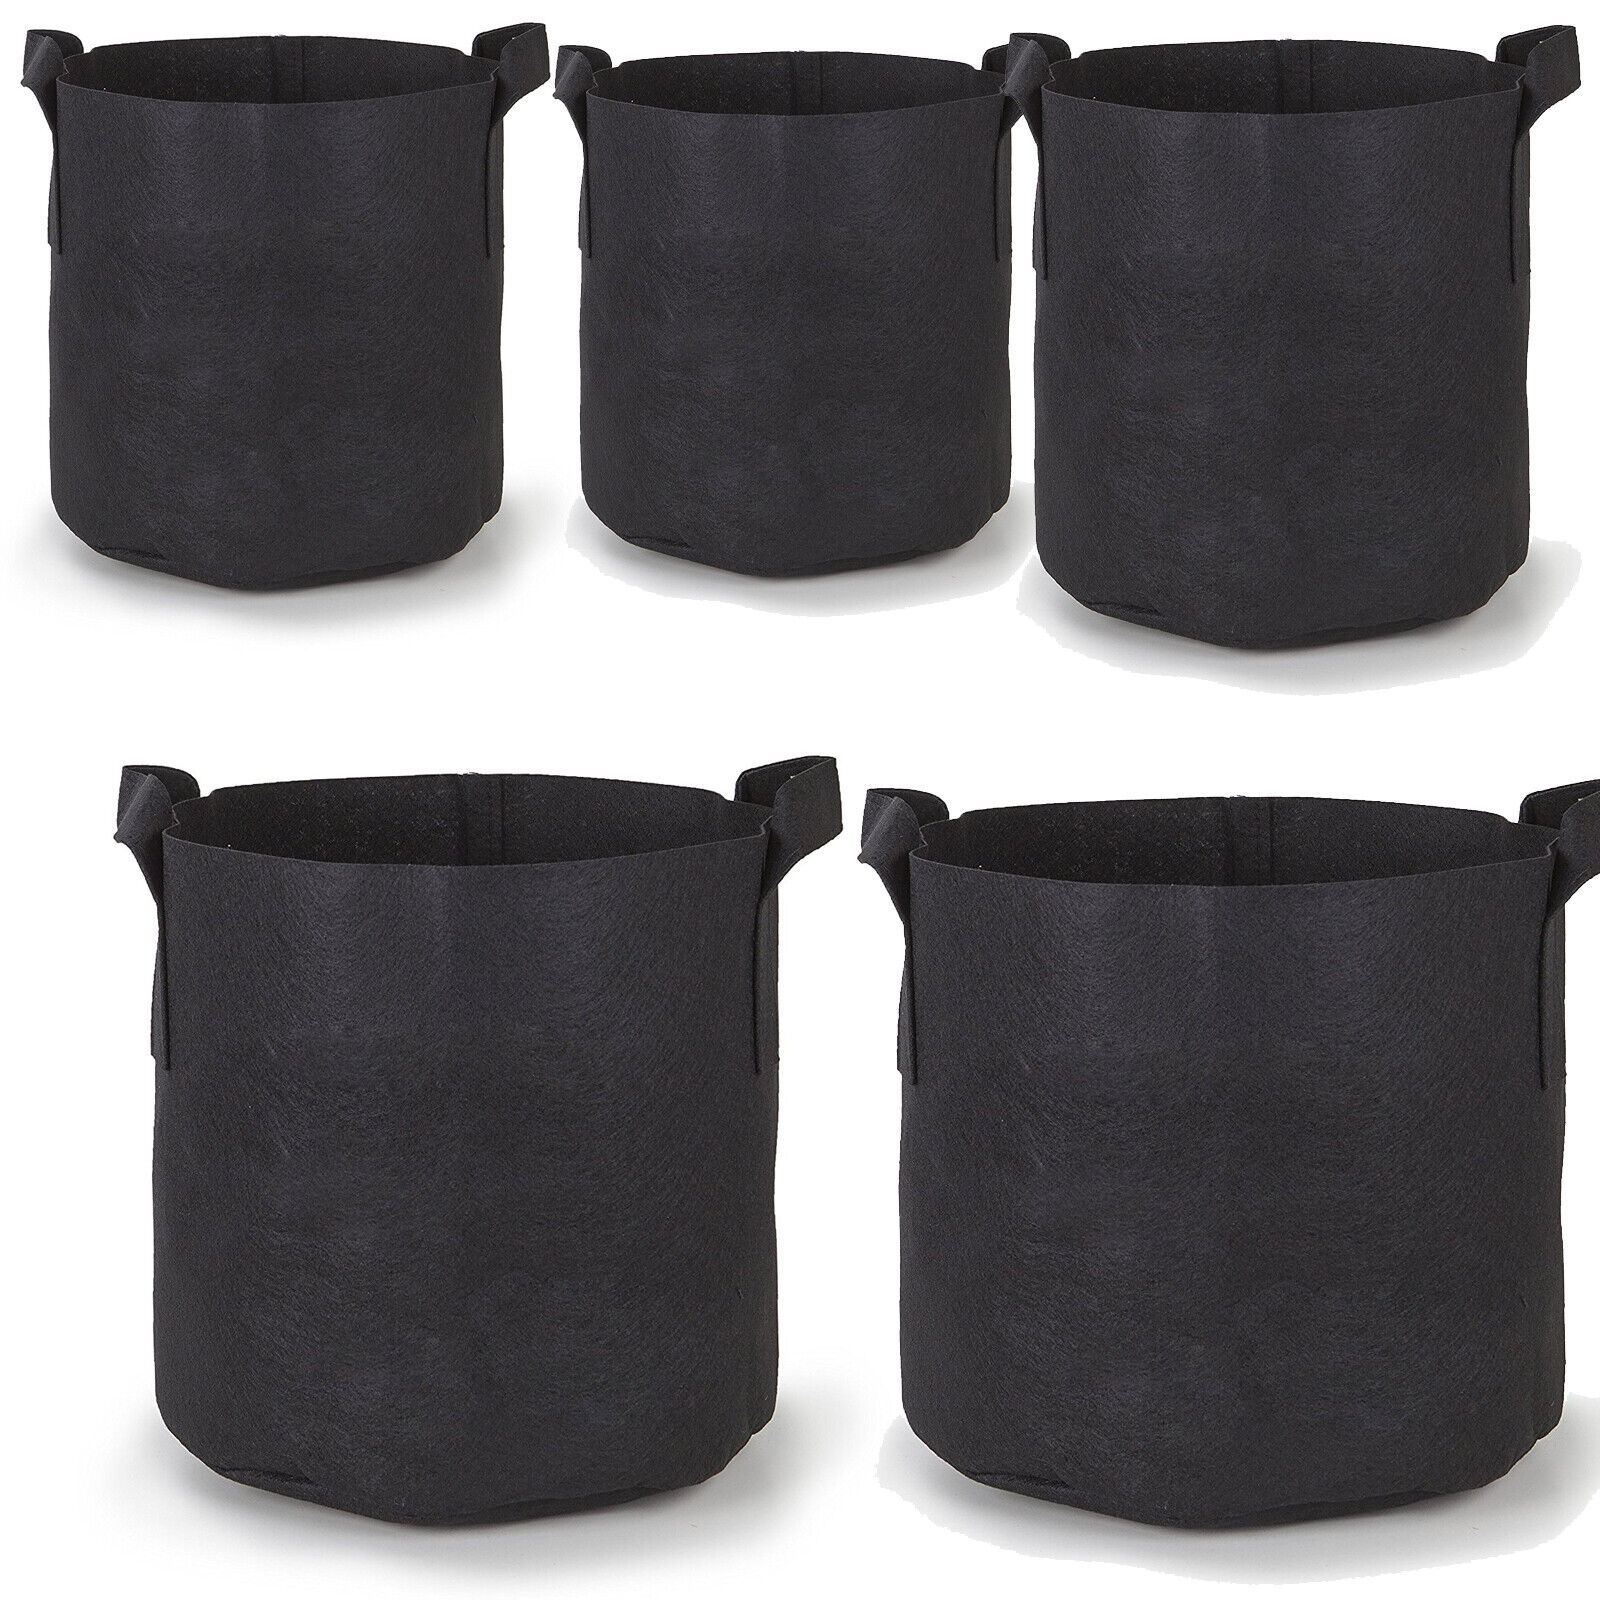 Lot 100 x 7 Gallon Grow Bags Aeration Fabric Pot Planter Root Growing Soil pots Generic Does Not Apply